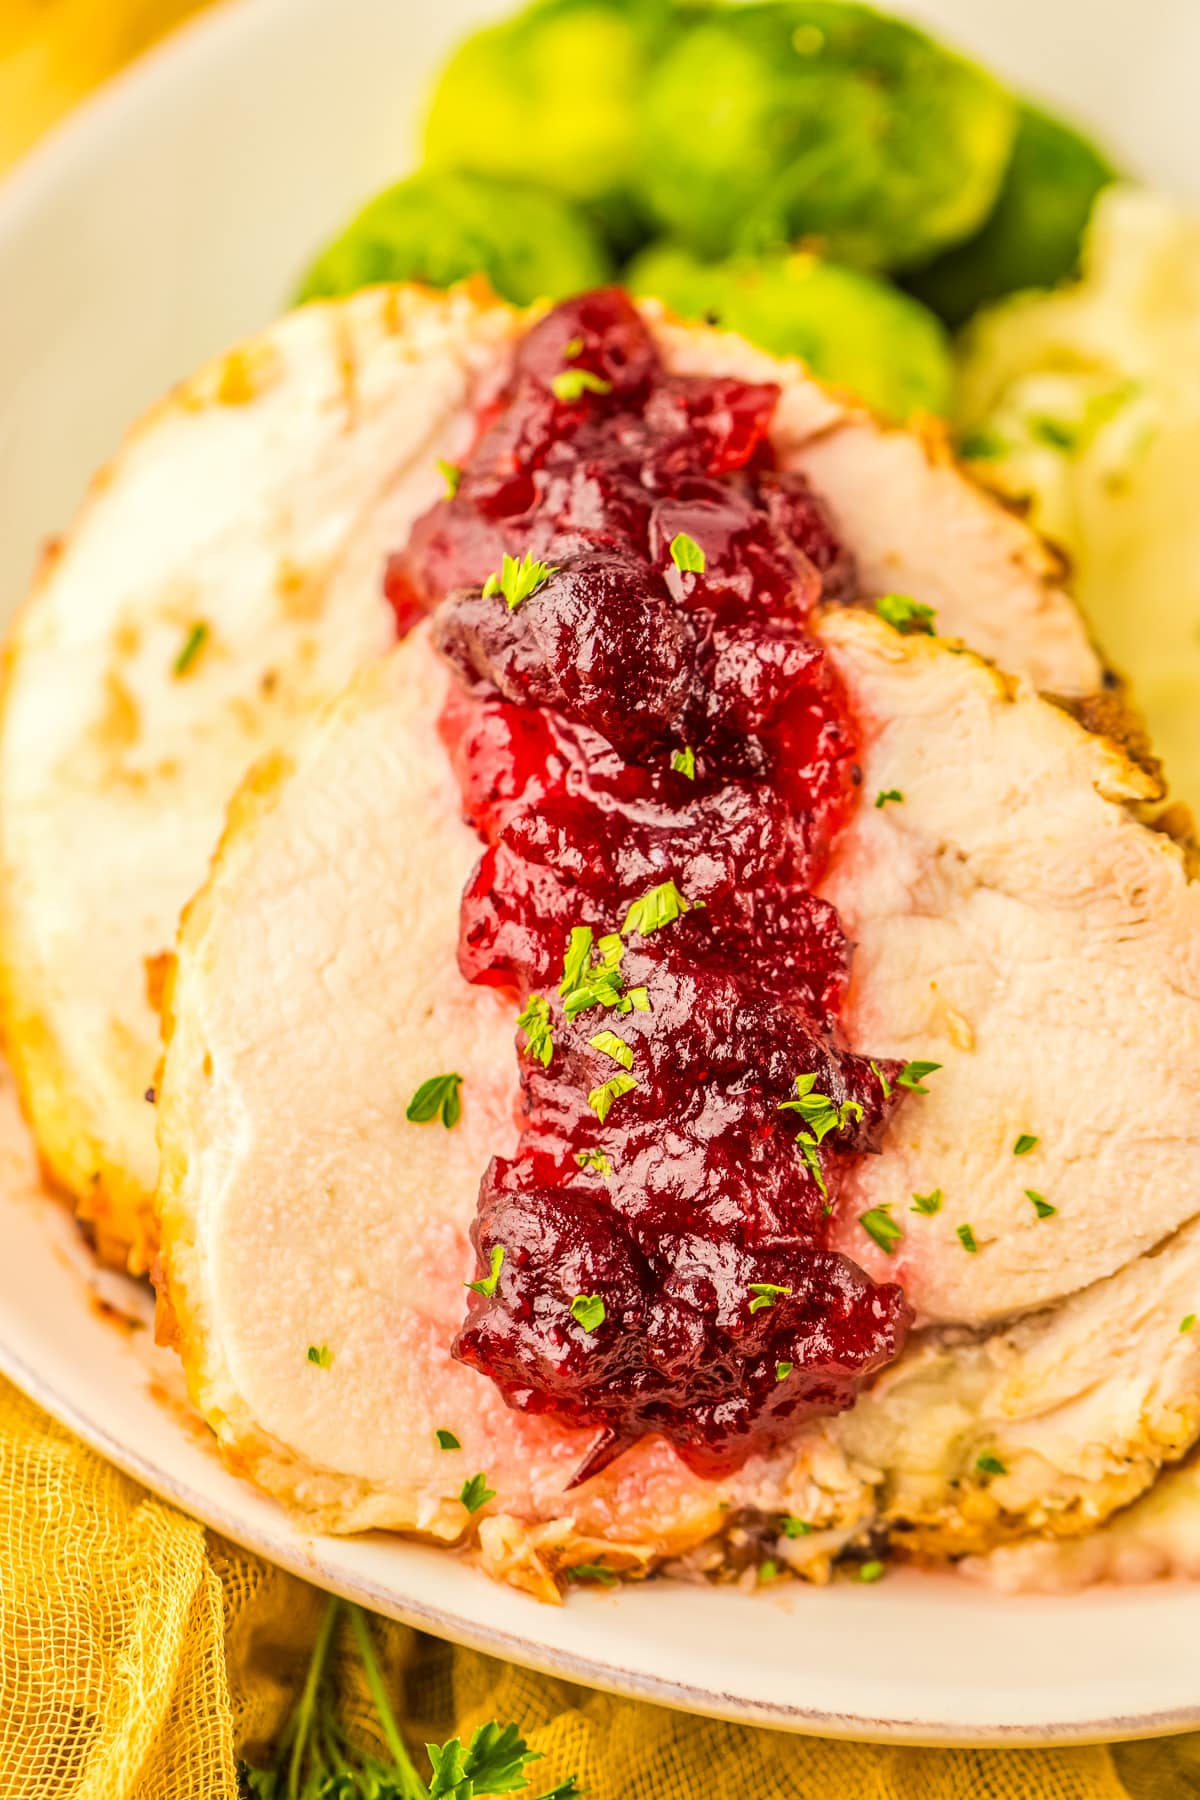 sliced turkey with cranberry sauce on a platter.